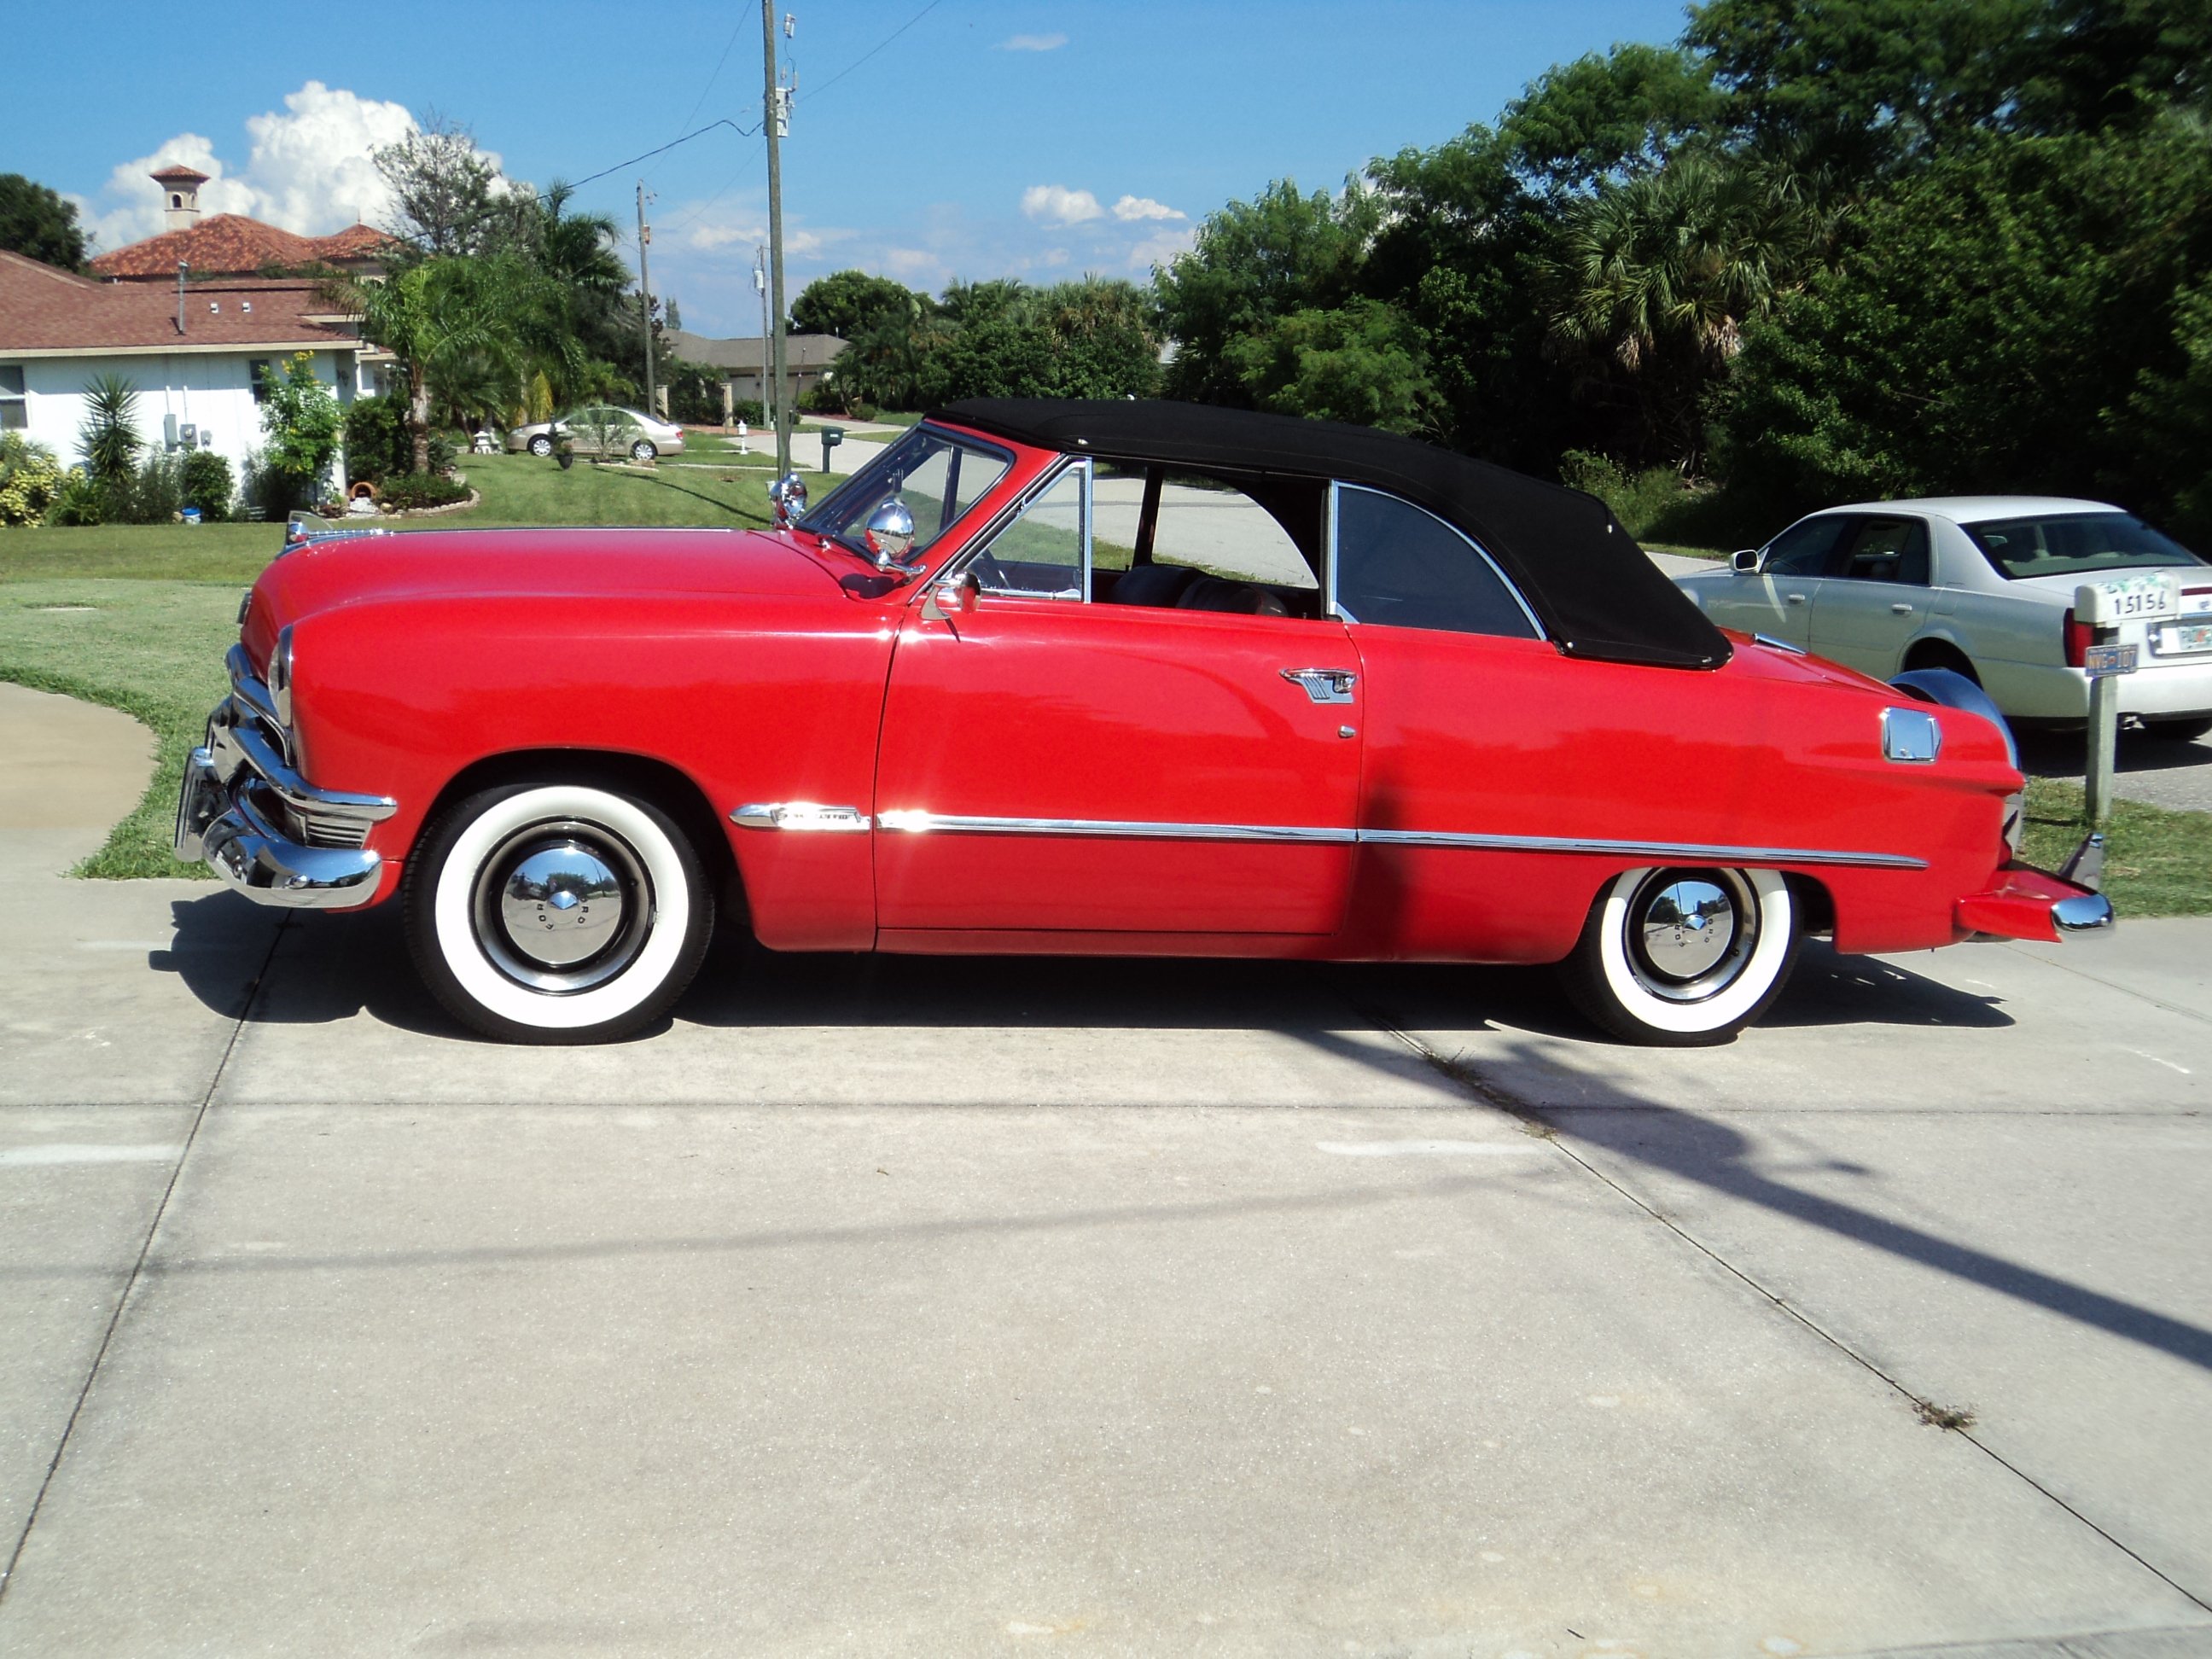 1950, Ford, Custonline, Deluxe, Convertible, Red, Classic, Old, Vintage, Original, Usa, 2592x1944 05 Wallpaper